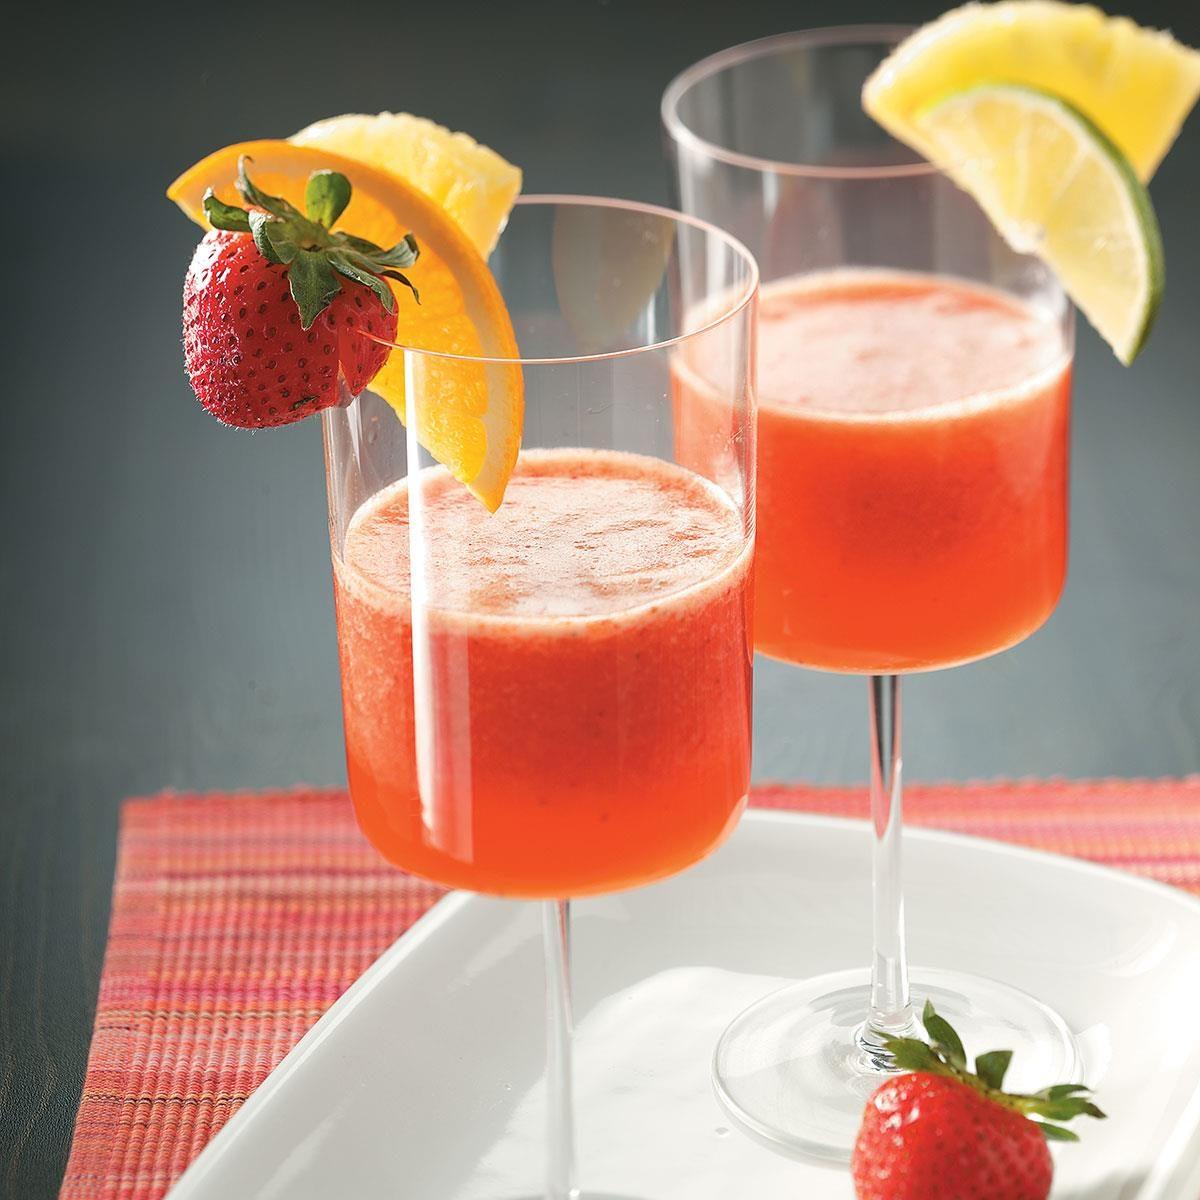 https://www.tasteofhome.com/wp-content/uploads/2018/01/Strawberry-Party-Punch_exps50873_TH1999634C10_01_3bC_RMS-7.jpg